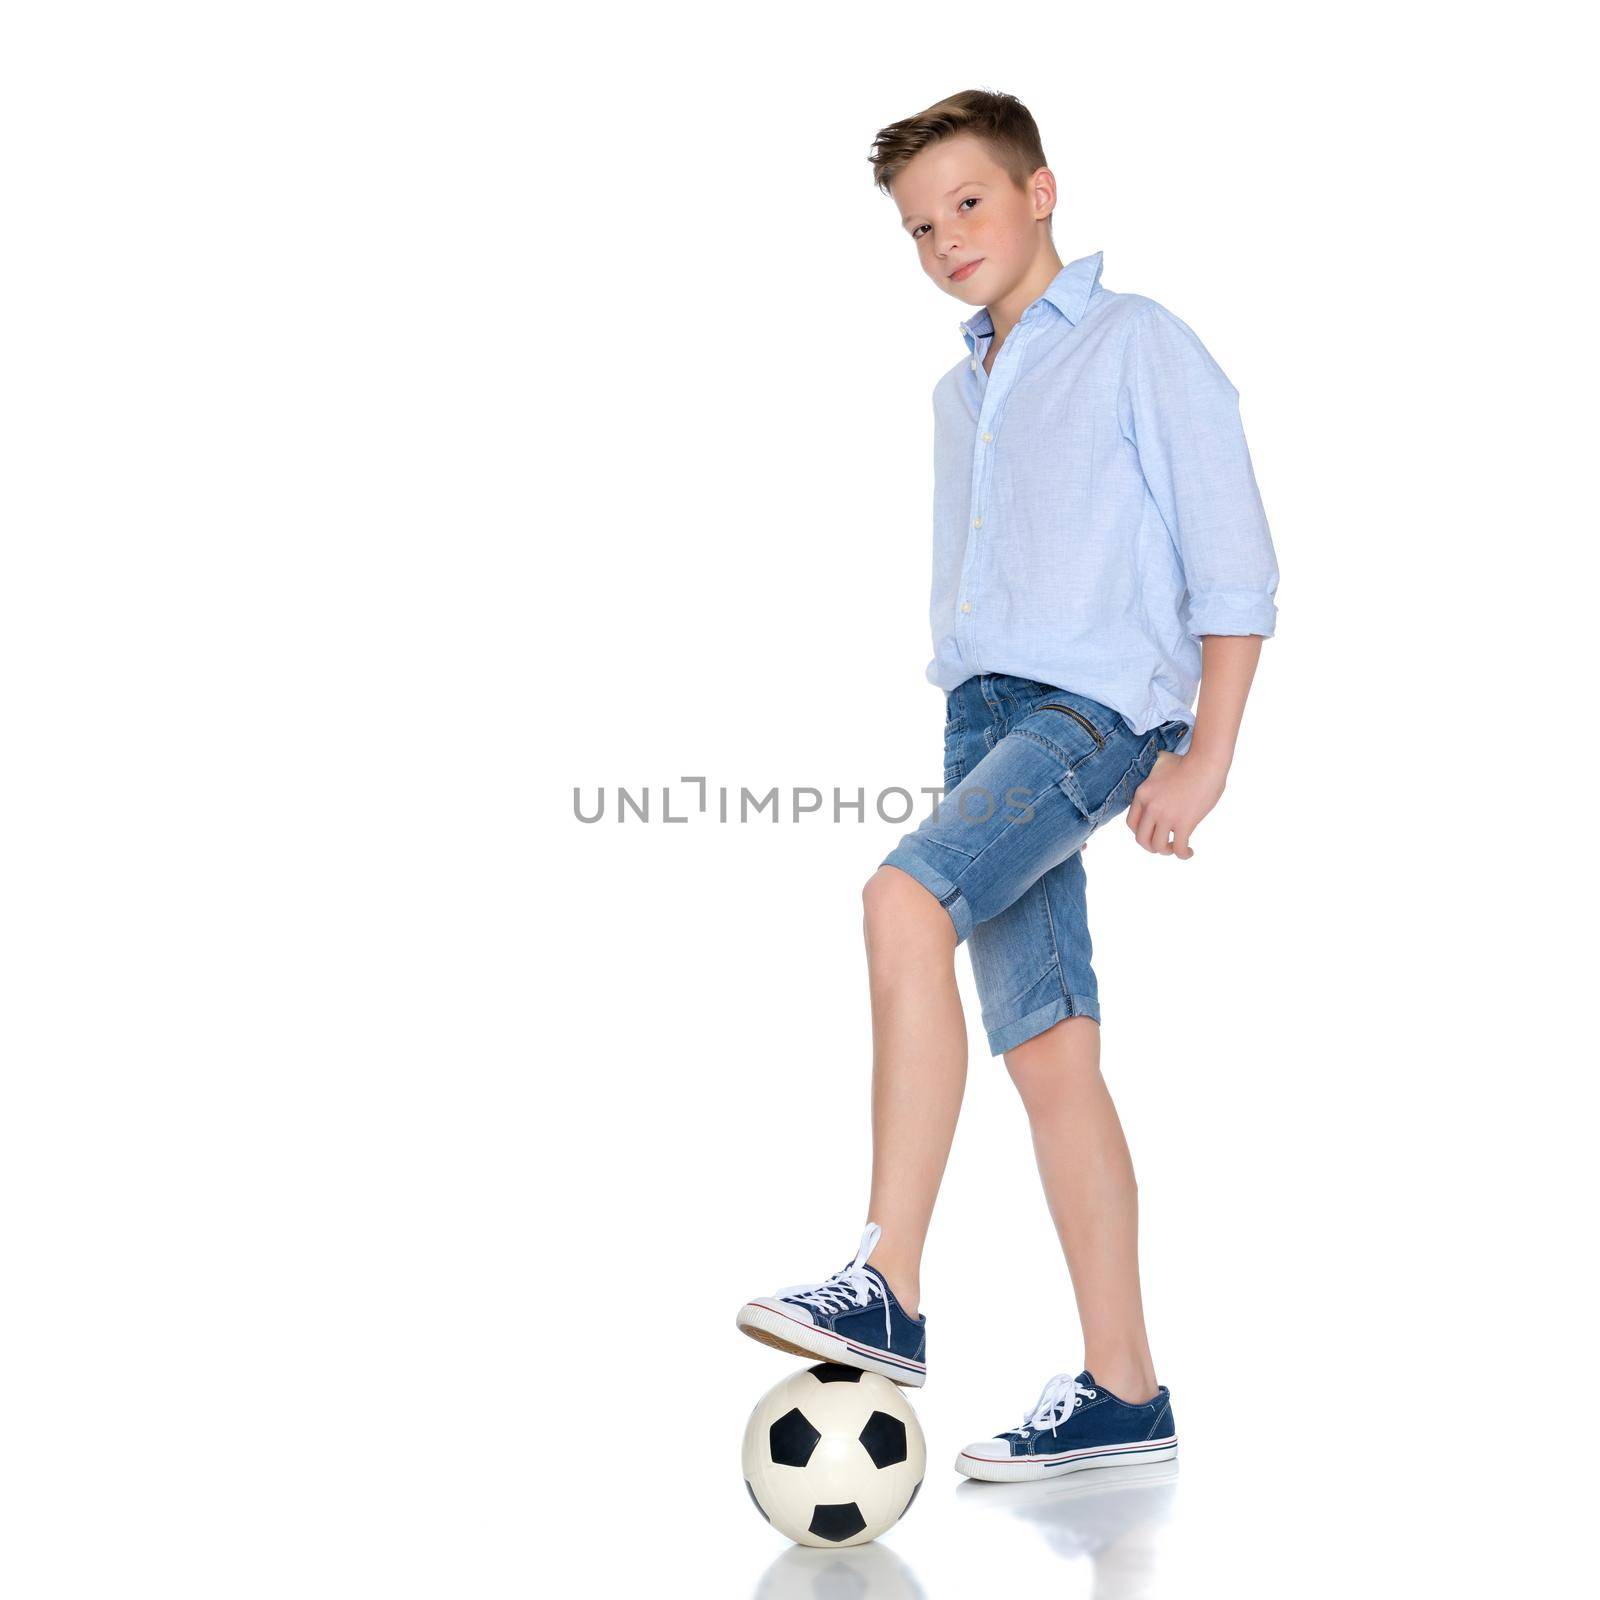 Sports boy teenager with a soccer ball. The concept of a healthy lifestyle, sport and fitness. Isolated on white background.